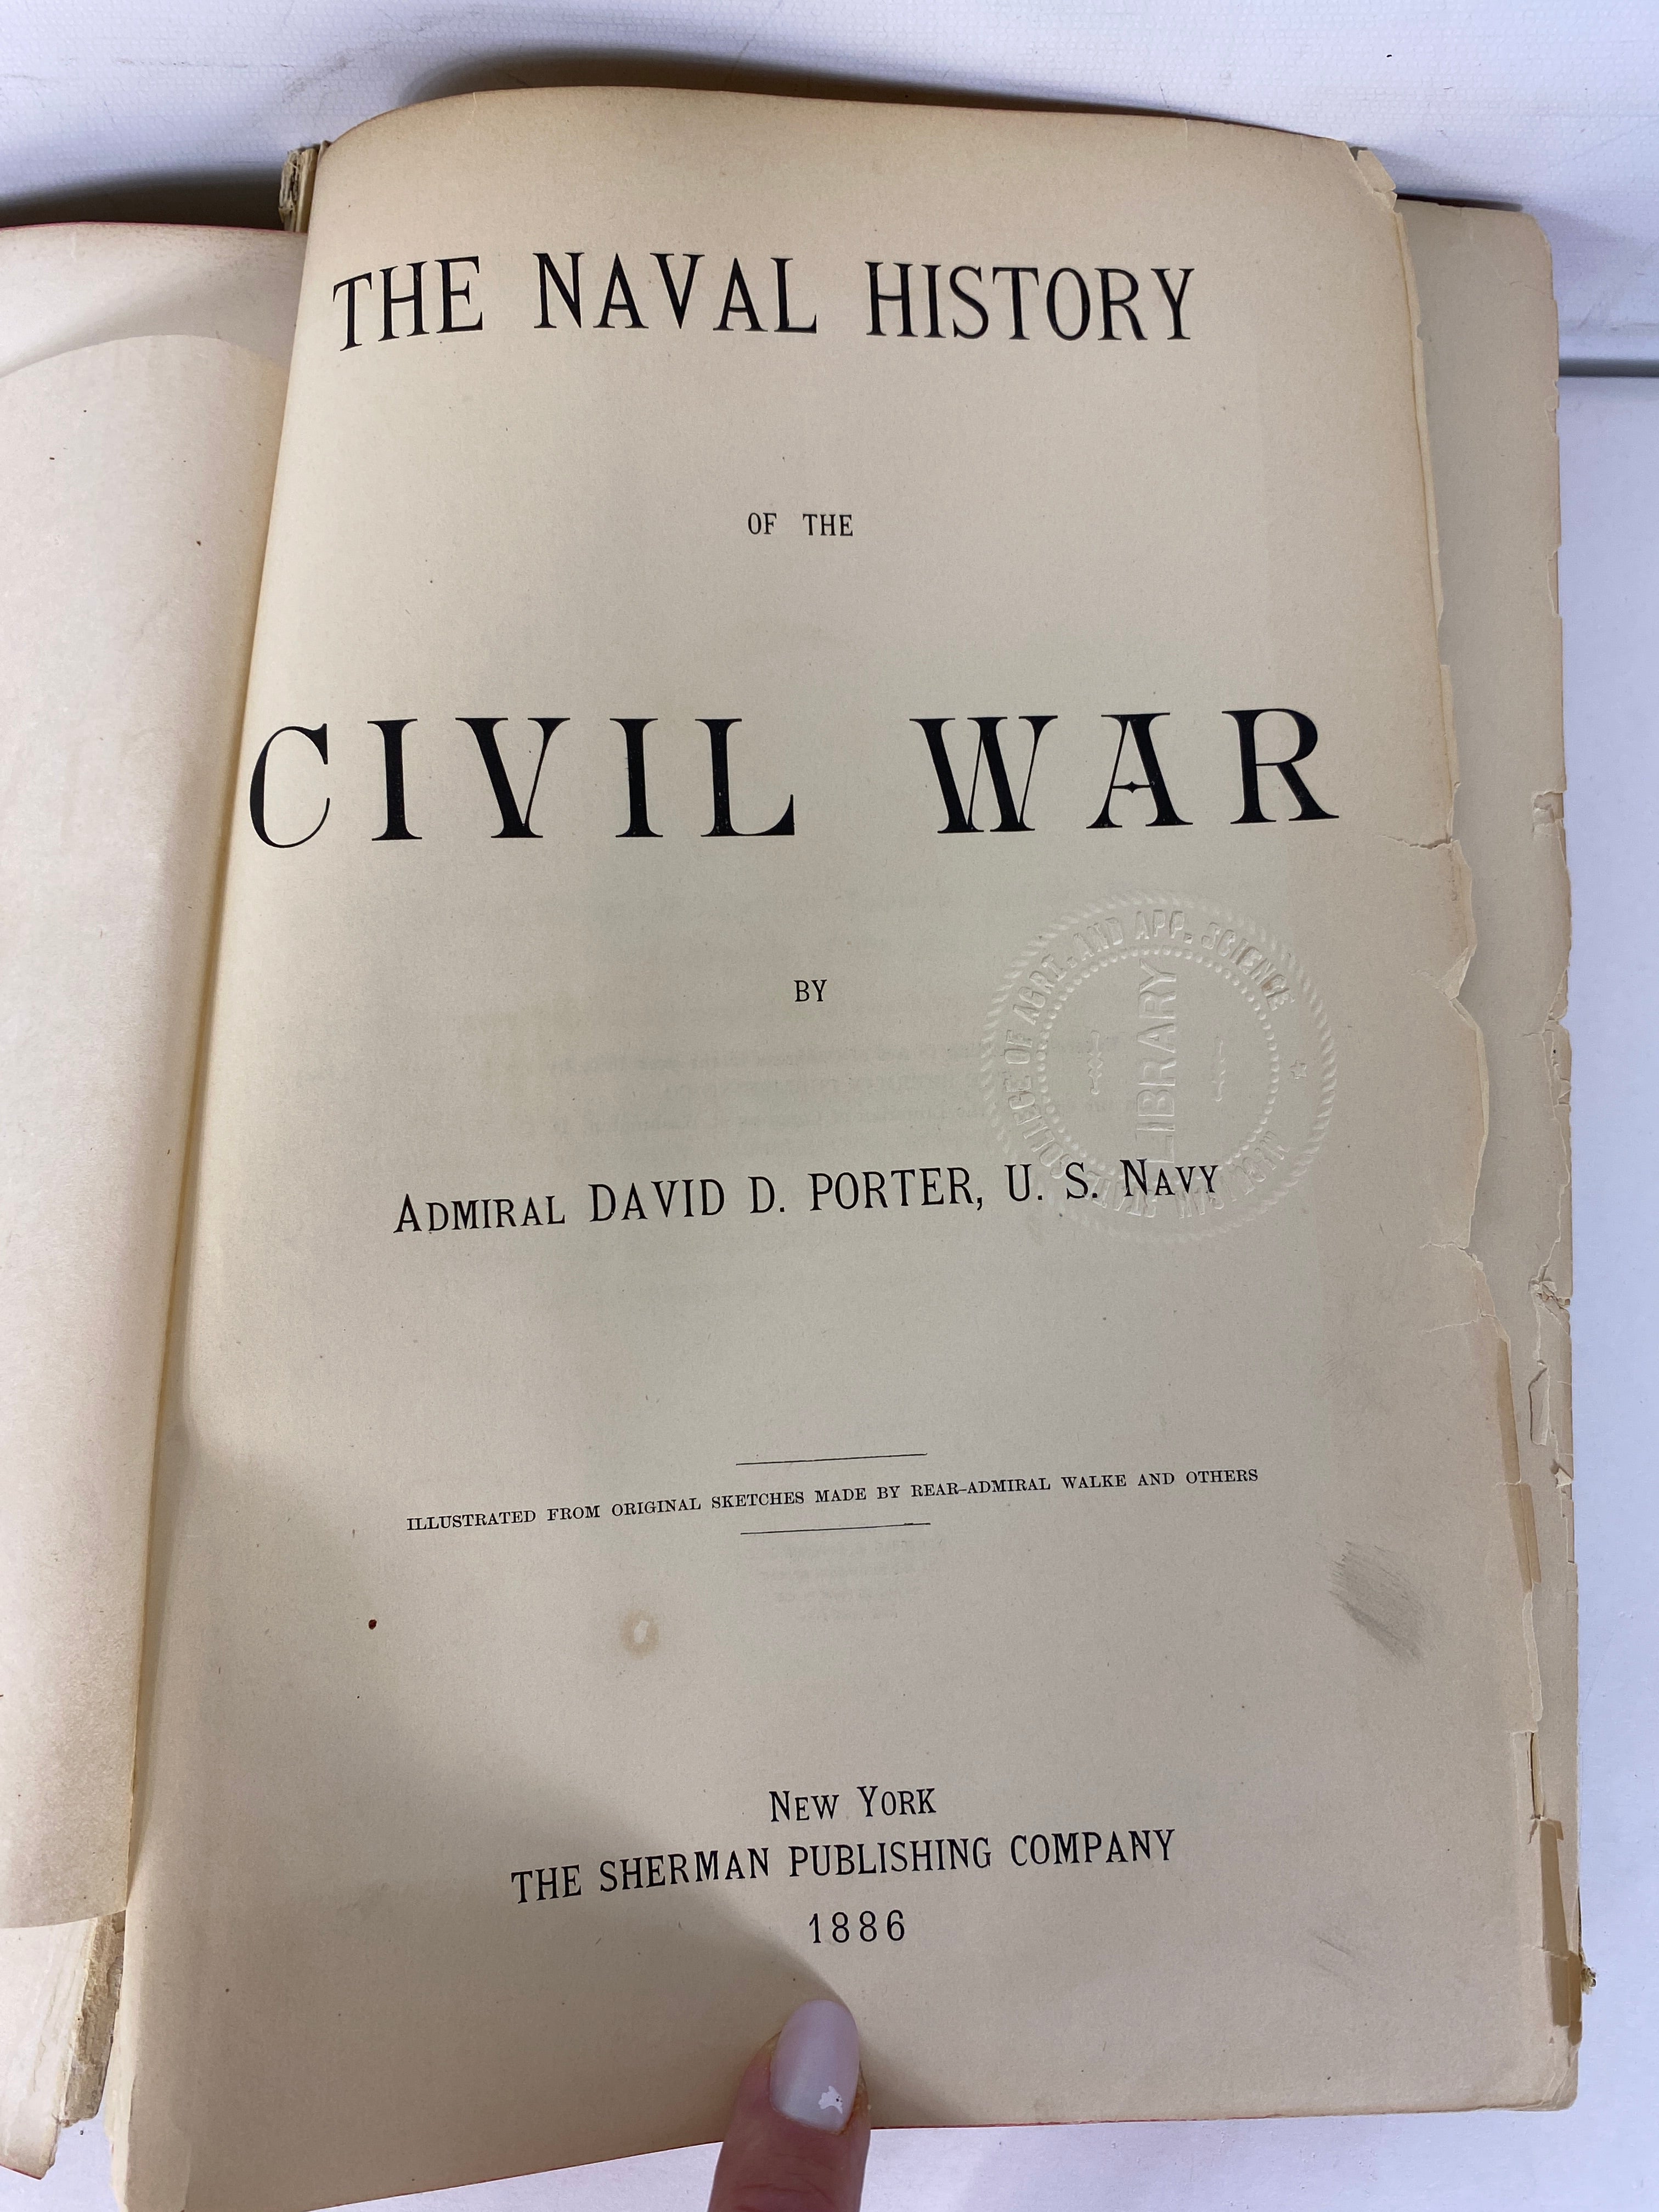 Naval History of the Civil War First Edition by Admiral David D. Porter 1886 HC